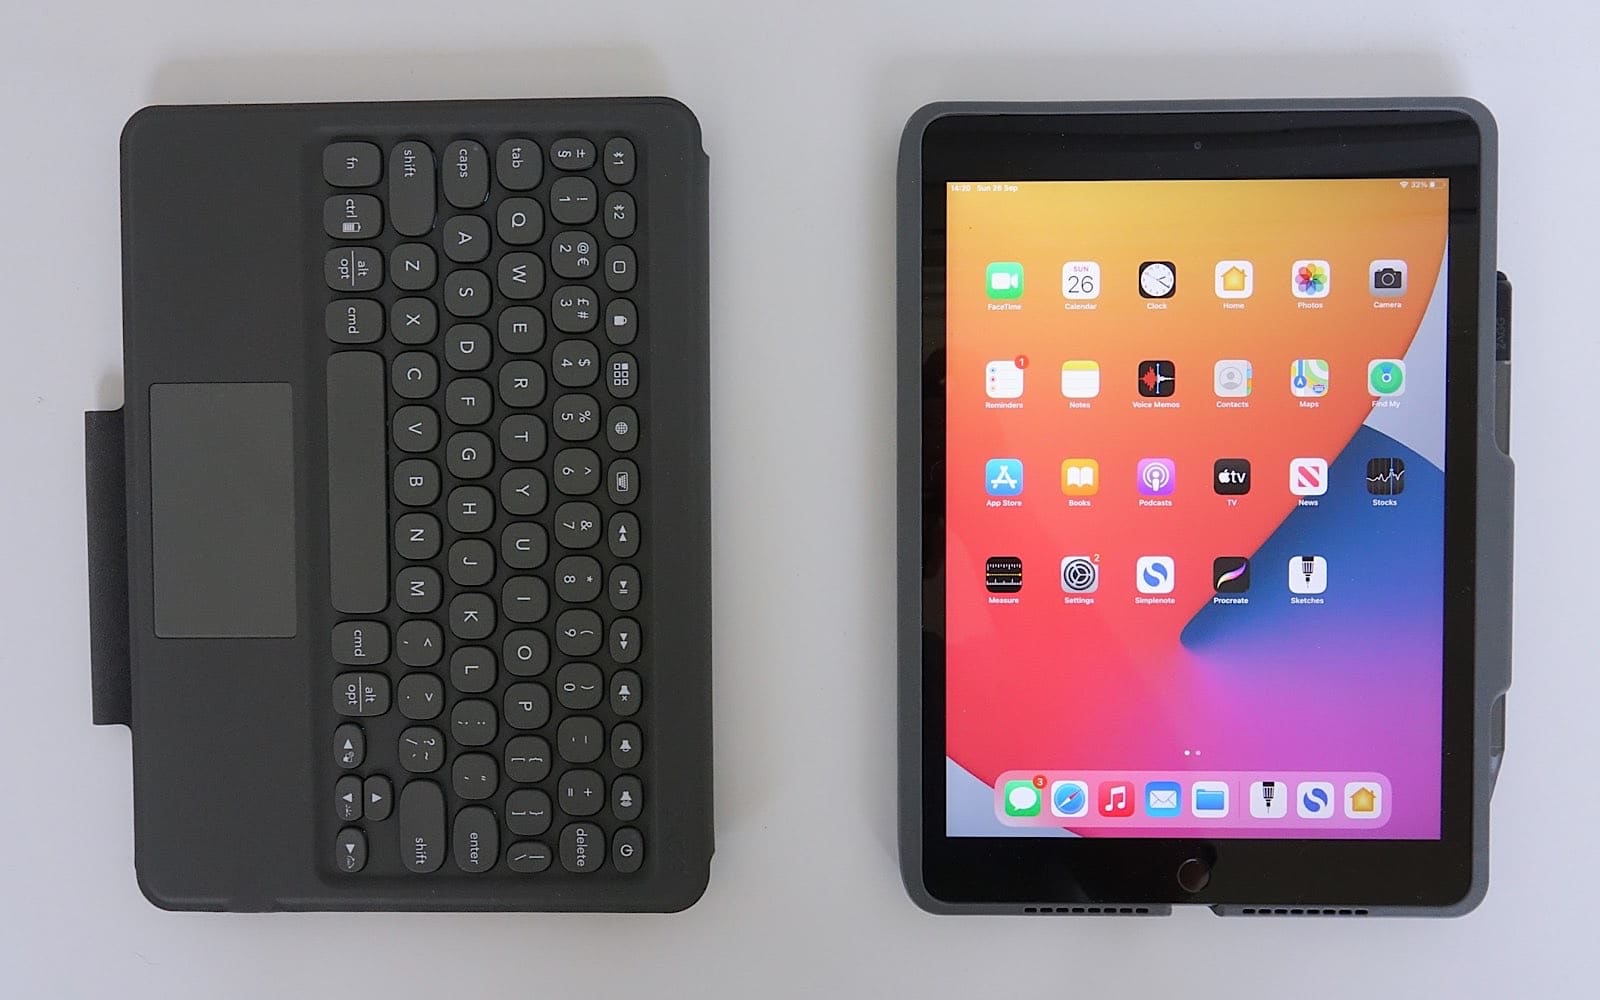 Zagg Pro Keys keyboard case comes in two parts: the keyboard case and the iPad case.